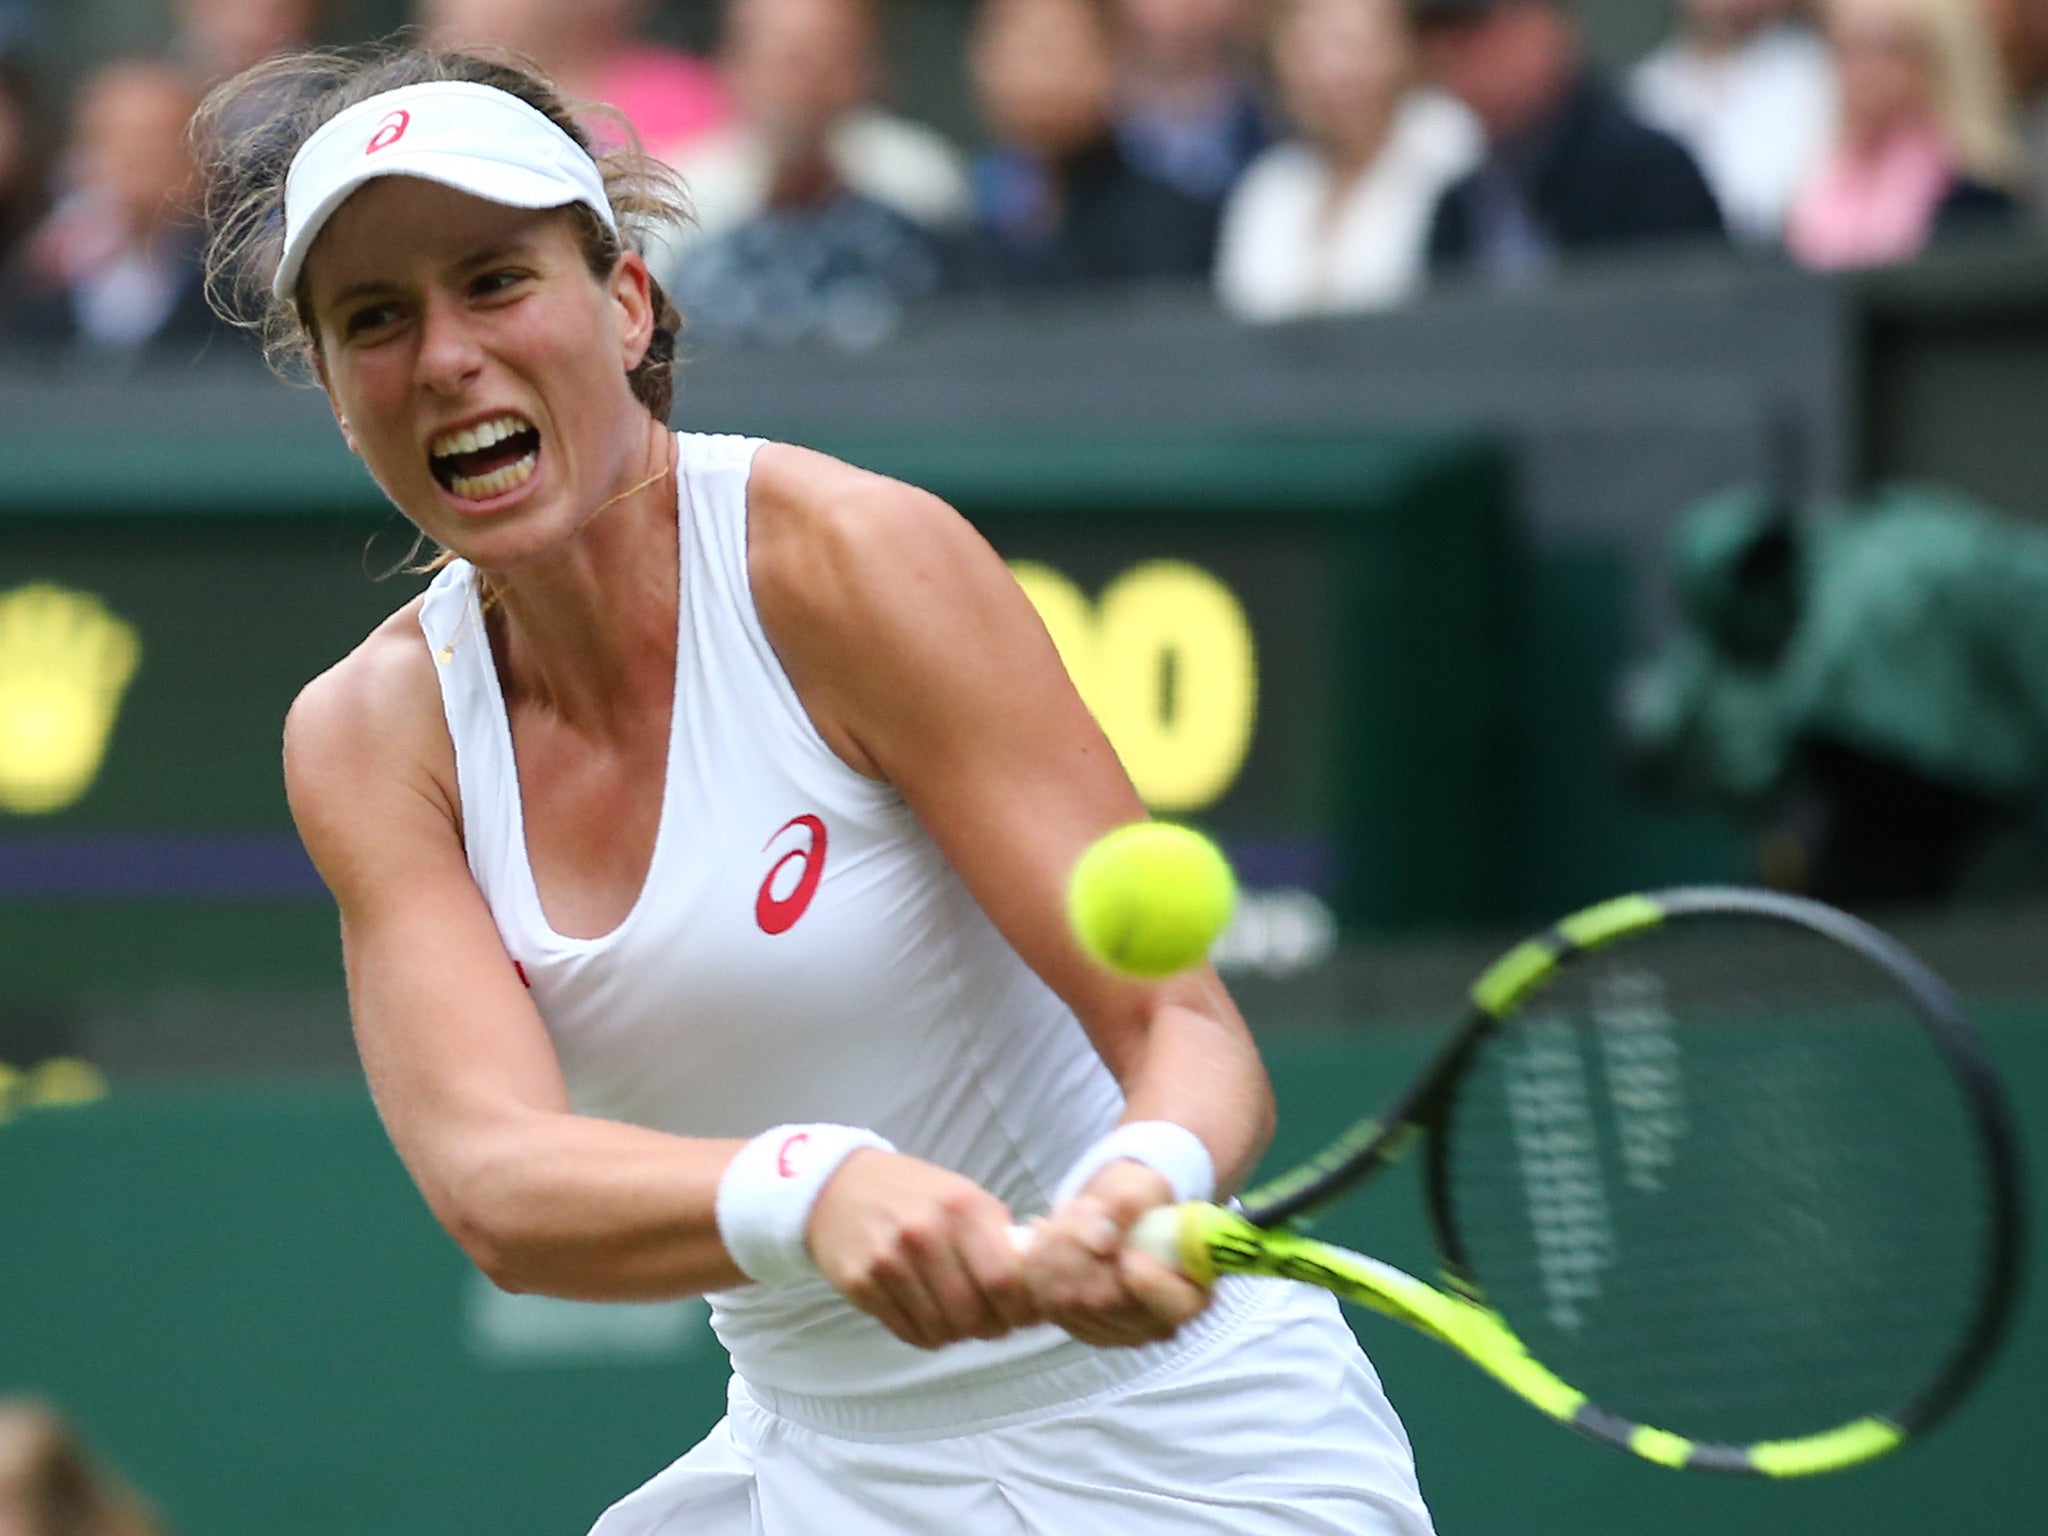 Konta has one win in five main draw matches at SW19